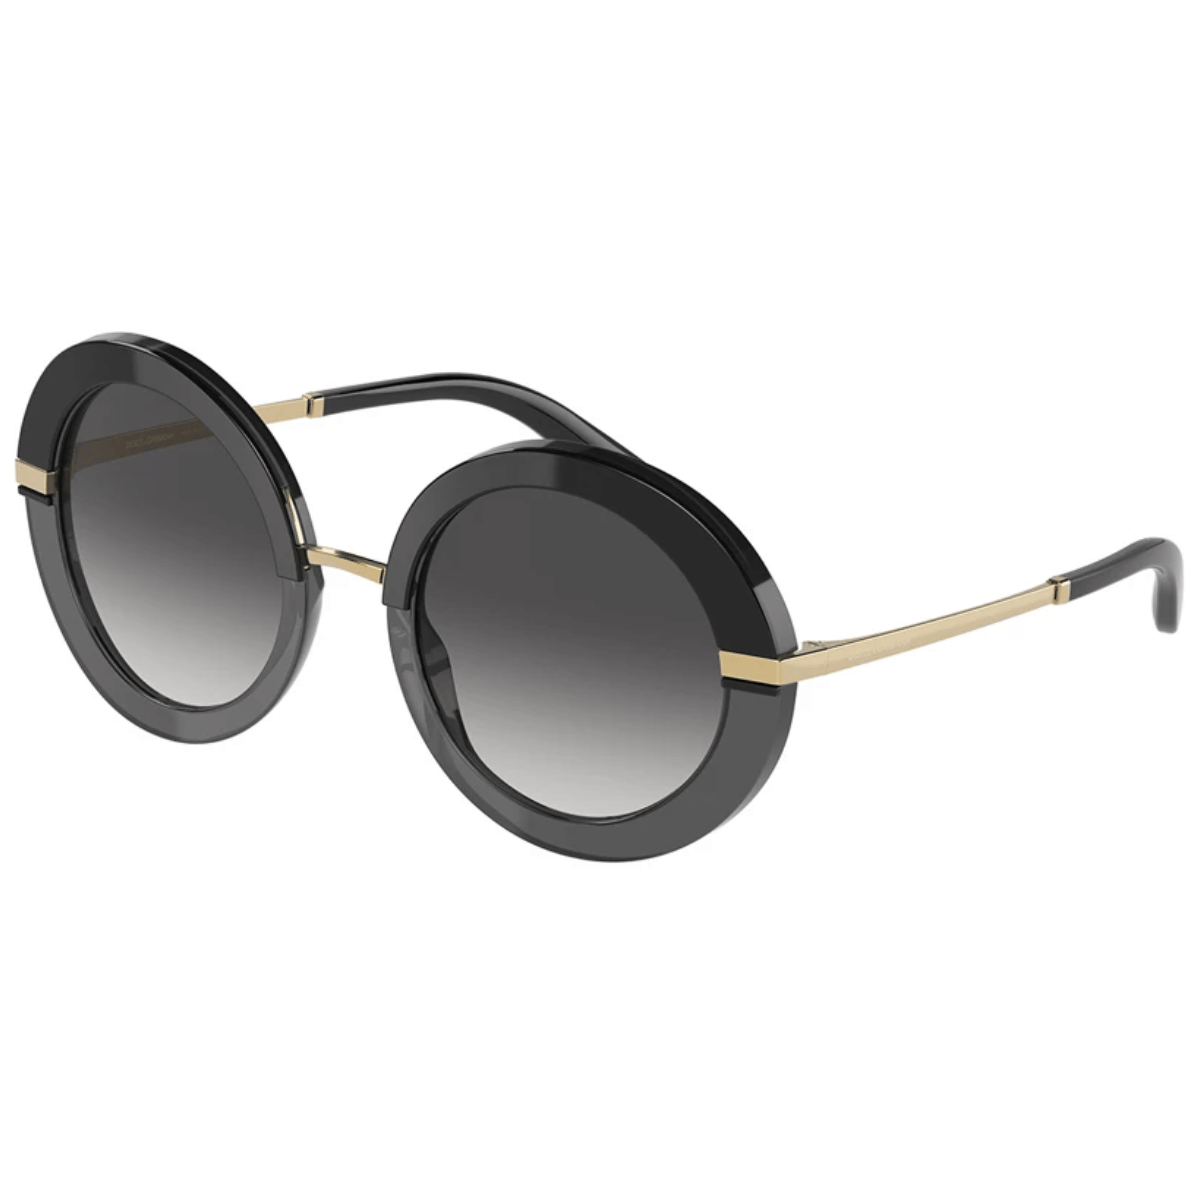 "Upgrade your look with the iconic D&G design of Dolce & Gabbana DG4393 32468G sunglasses from Optorium."